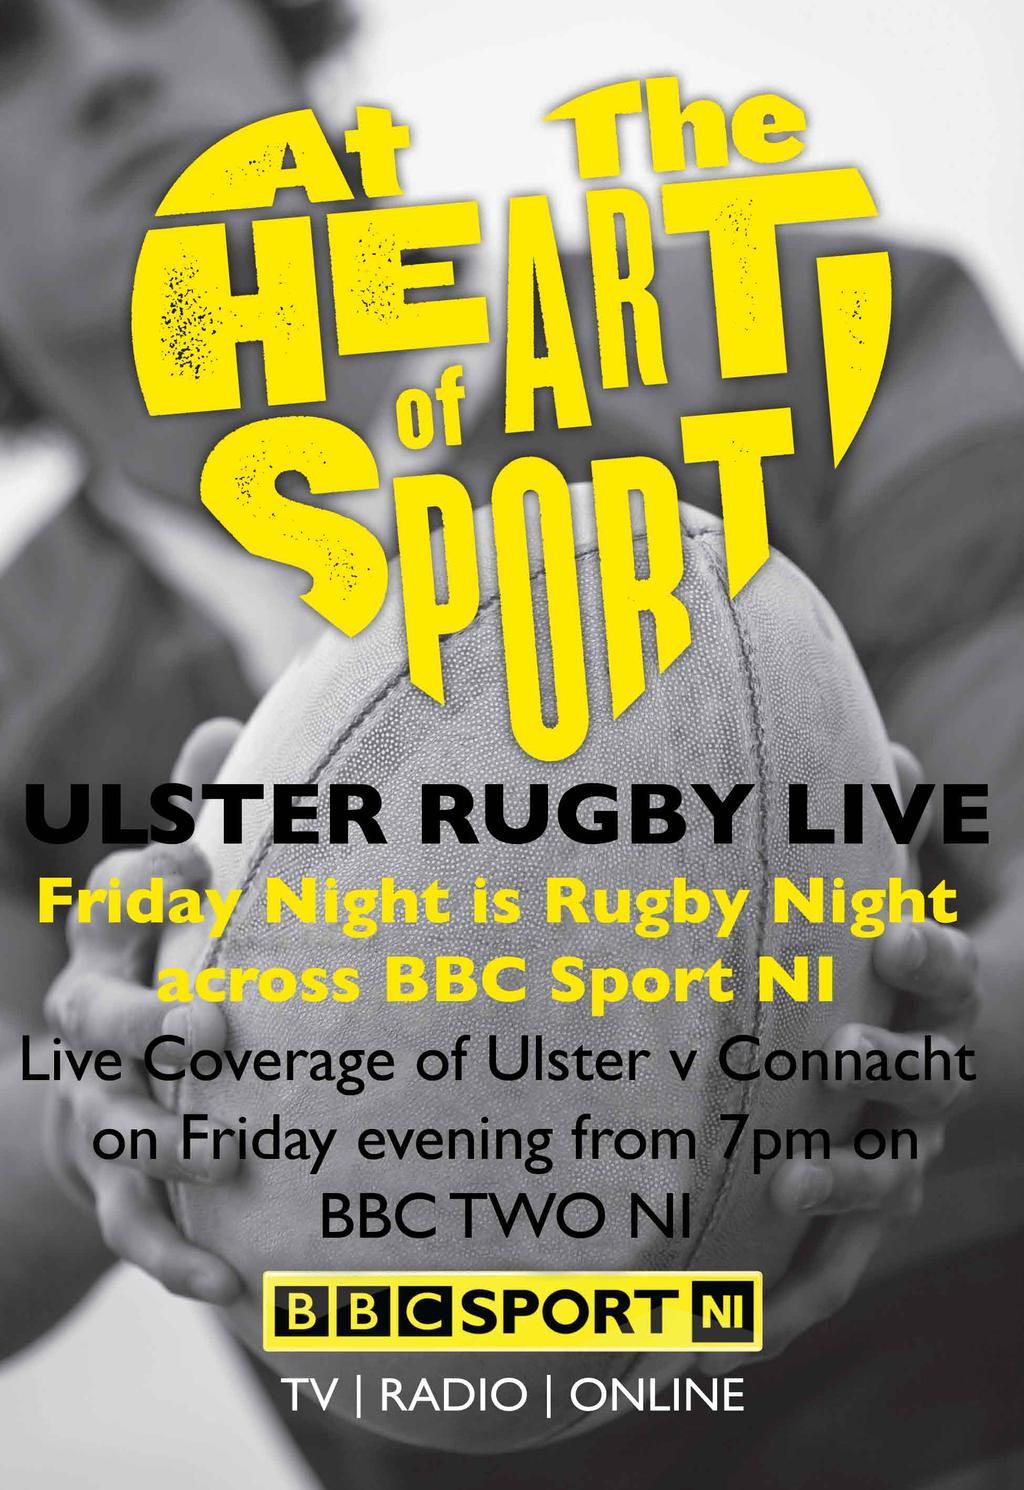 BBC Audience Council is looking for new members Ulster Rugby Live On Saturday, April 16, Ulster are away to Leinster for this vital Magners League game as they continue their quest for a place in the